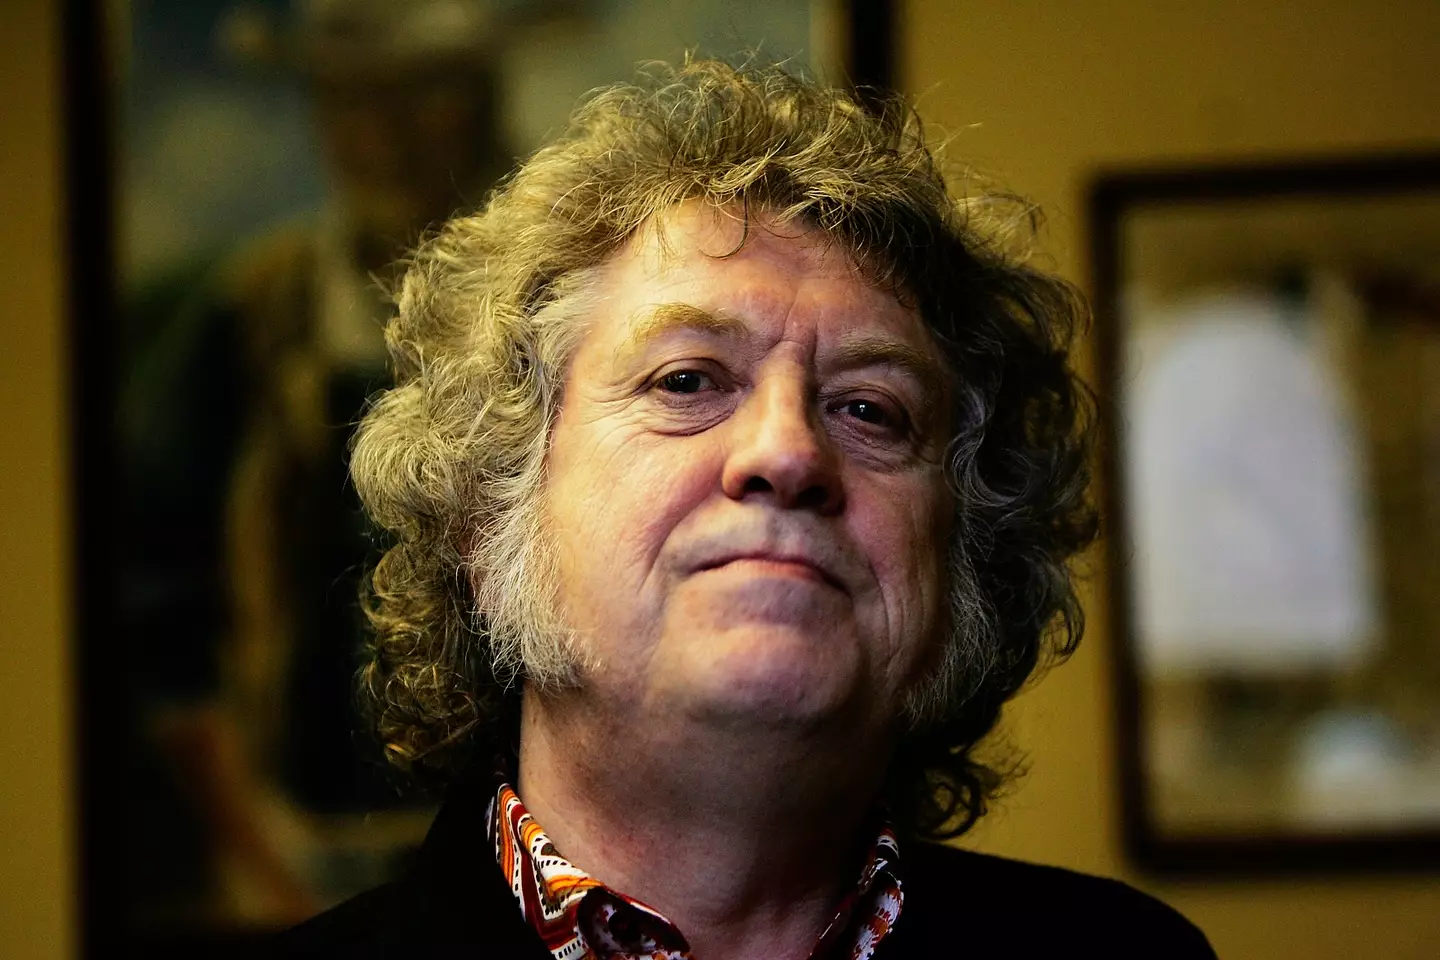 Noddy Holder was handed just six months to live following his cancer diagnosis.